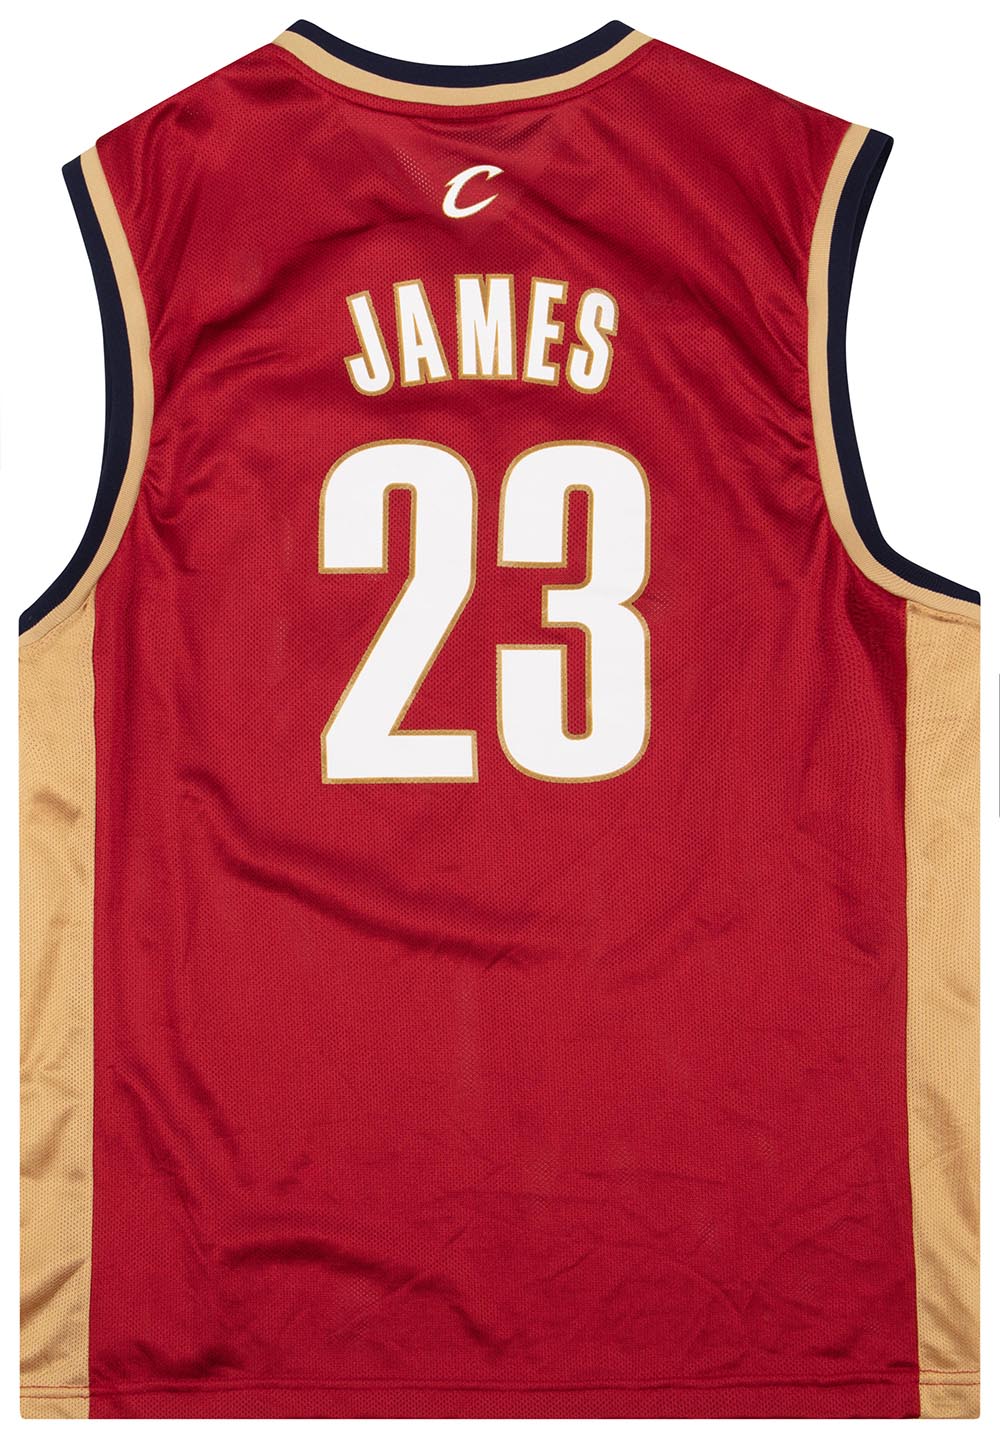 2006-10 CLEVELAND CAVALIERS JAMES #23 ADIDAS JERSEY (AWAY) L